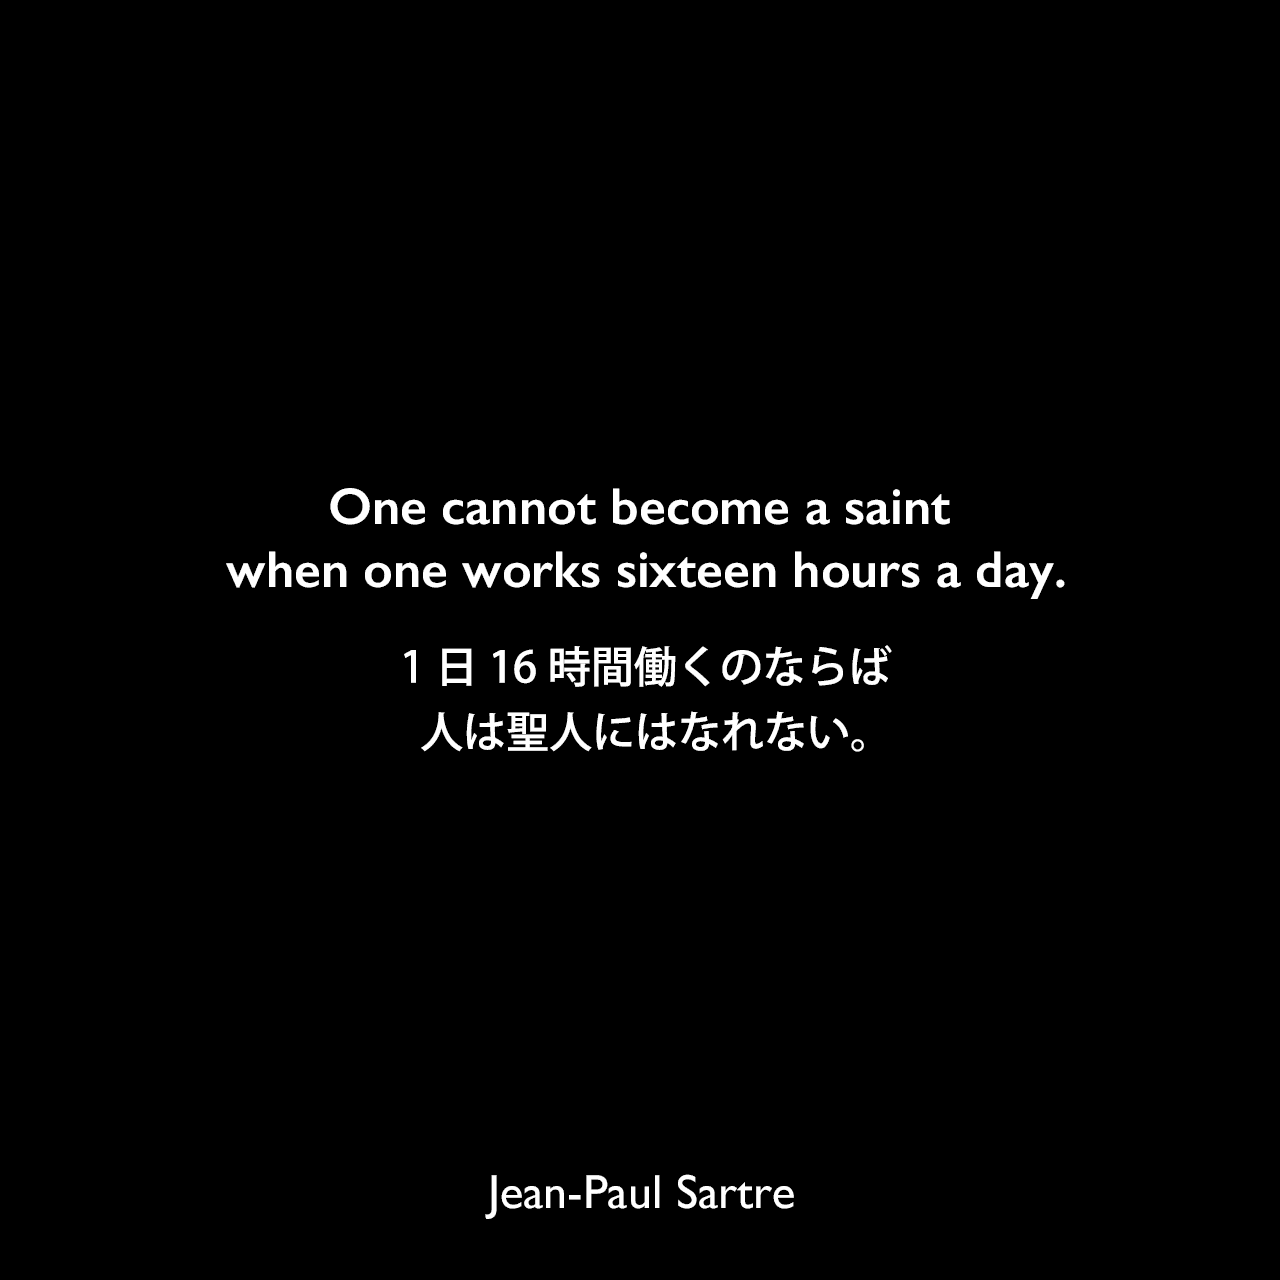 One cannot become a saint when one works sixteen hours a day.1日16時間働くのならば、人は聖人にはなれない。- サルトルによる戯曲「悪魔と神」よりJean-Paul Sartre